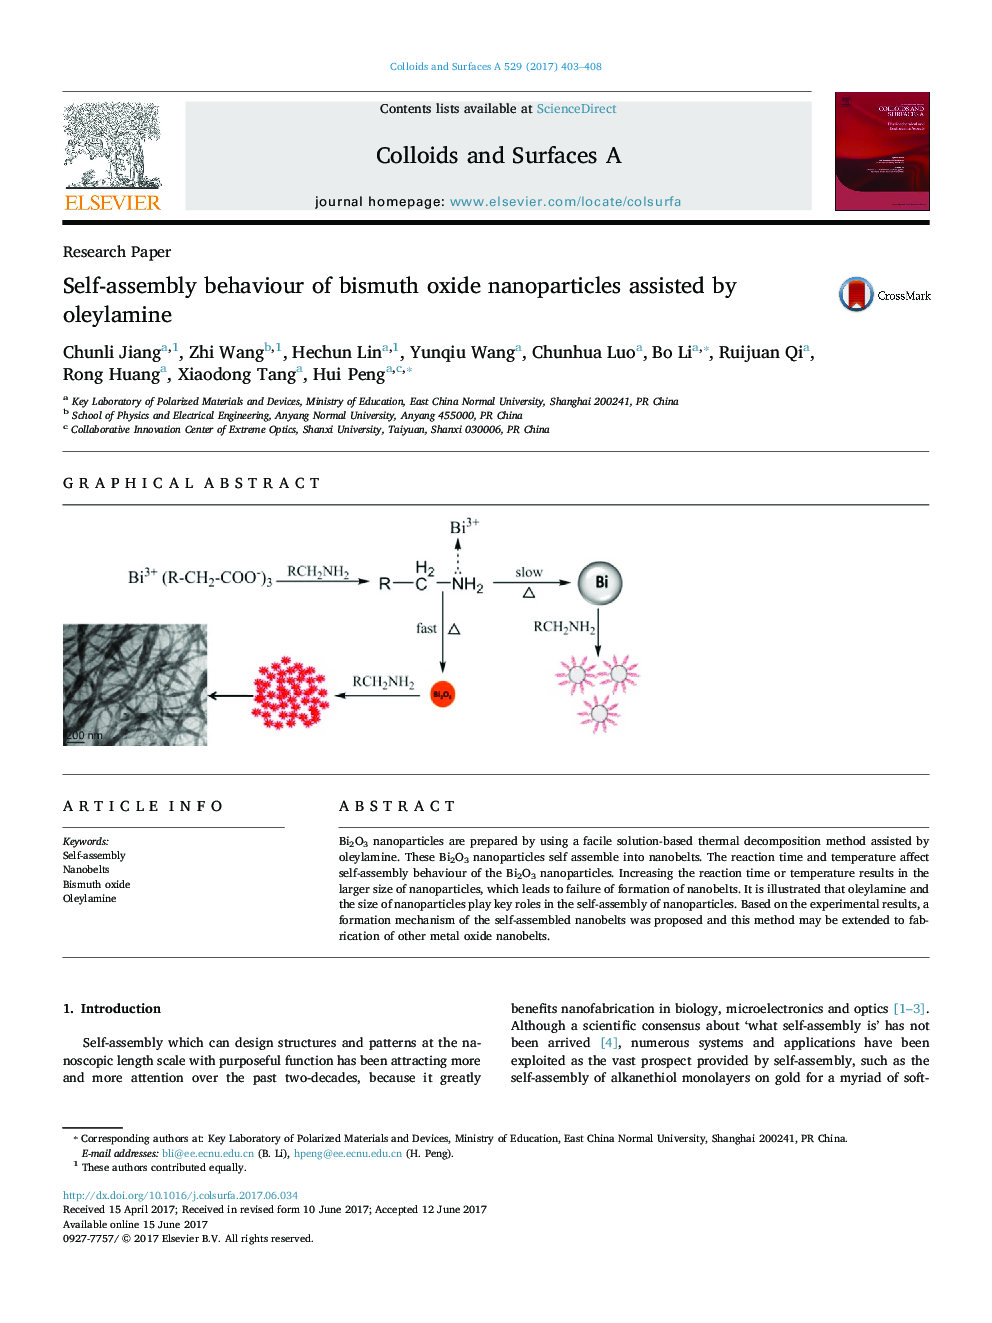 Self-assembly behaviour of bismuth oxide nanoparticles assisted by oleylamine